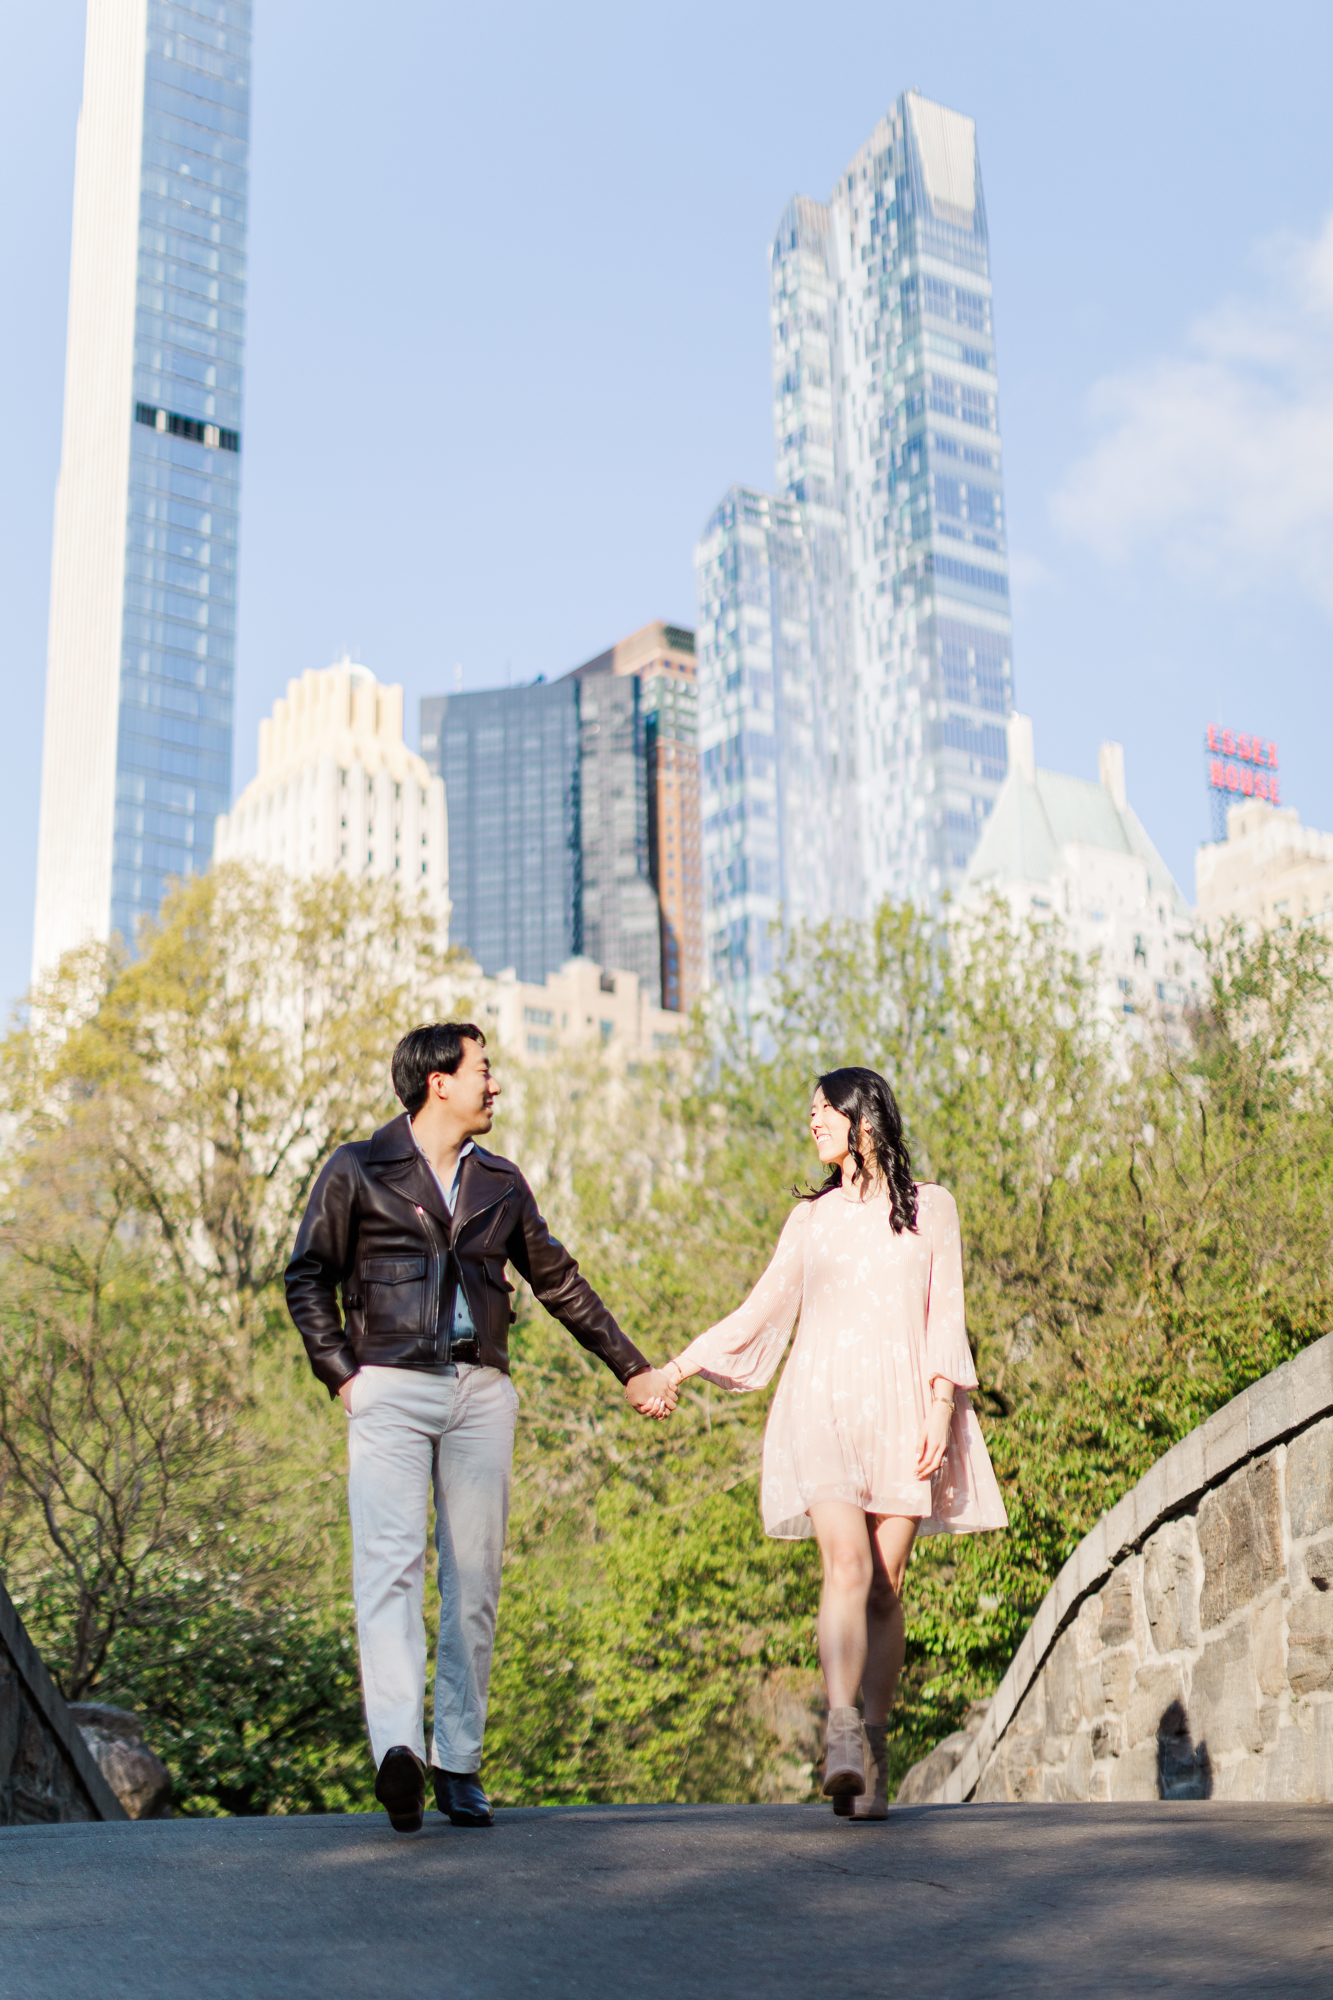 Intimate Central Park Engagement Photos in the Spring